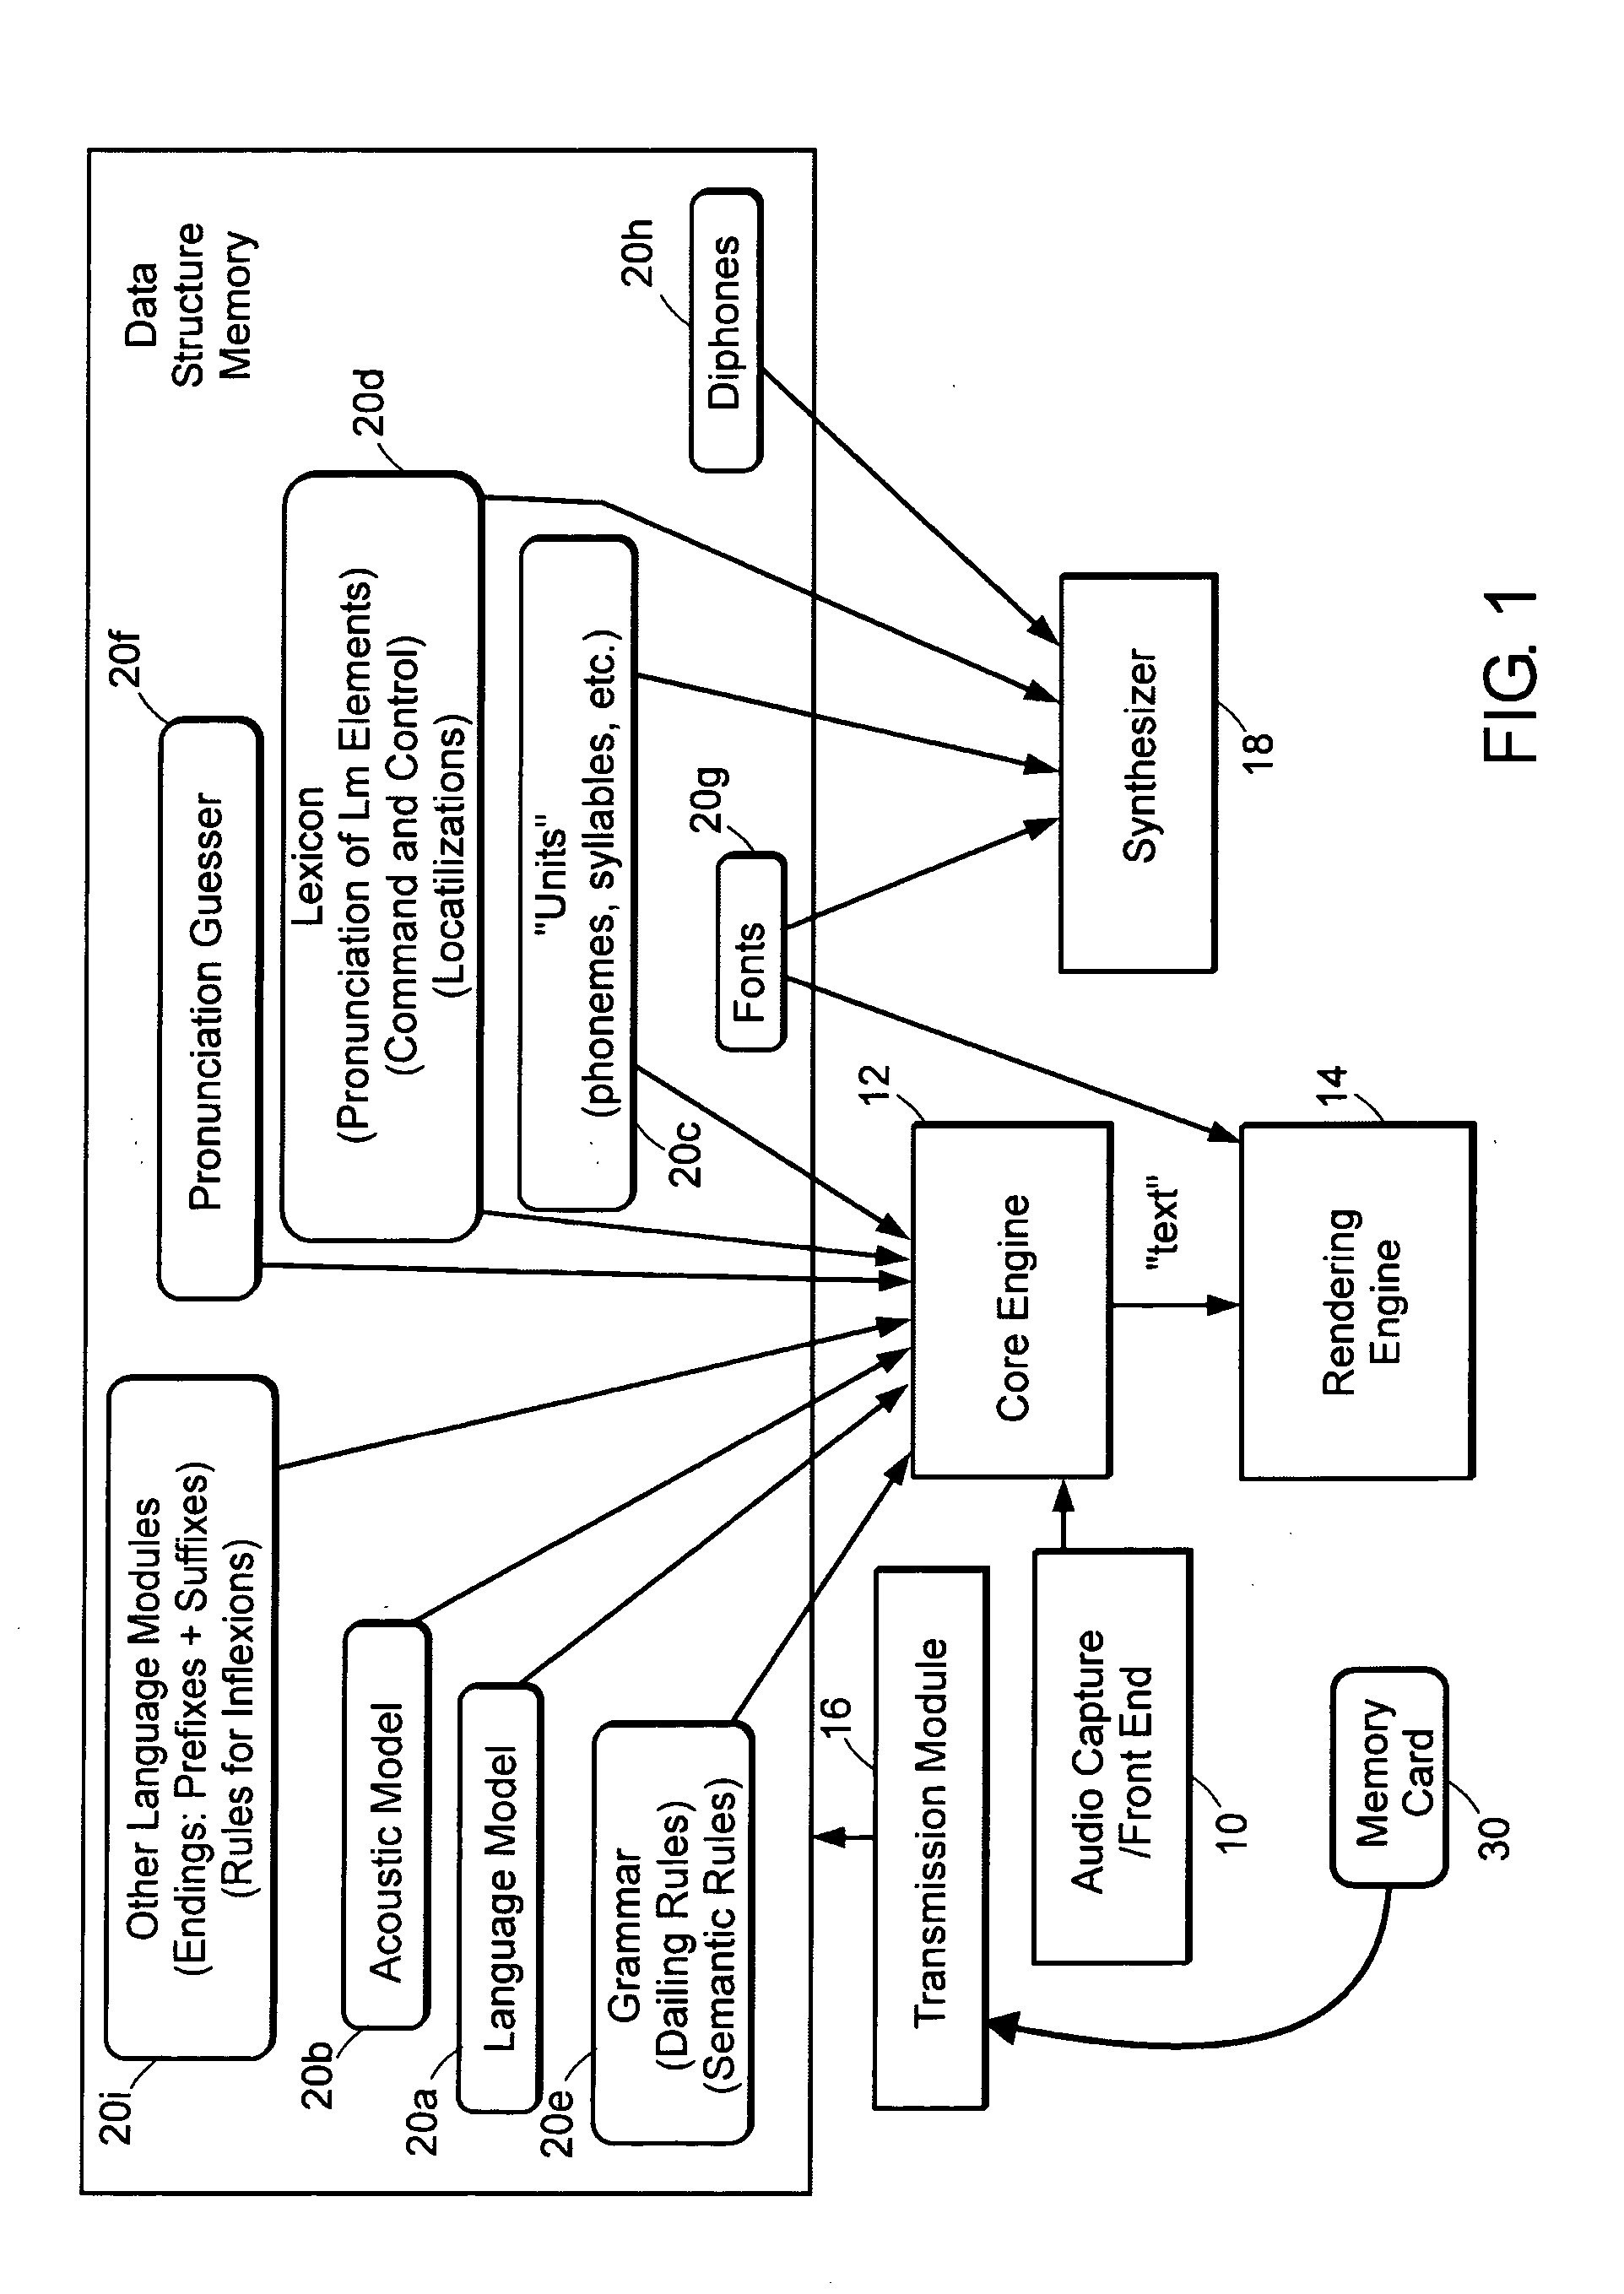 Installing language modules in a mobile communication device